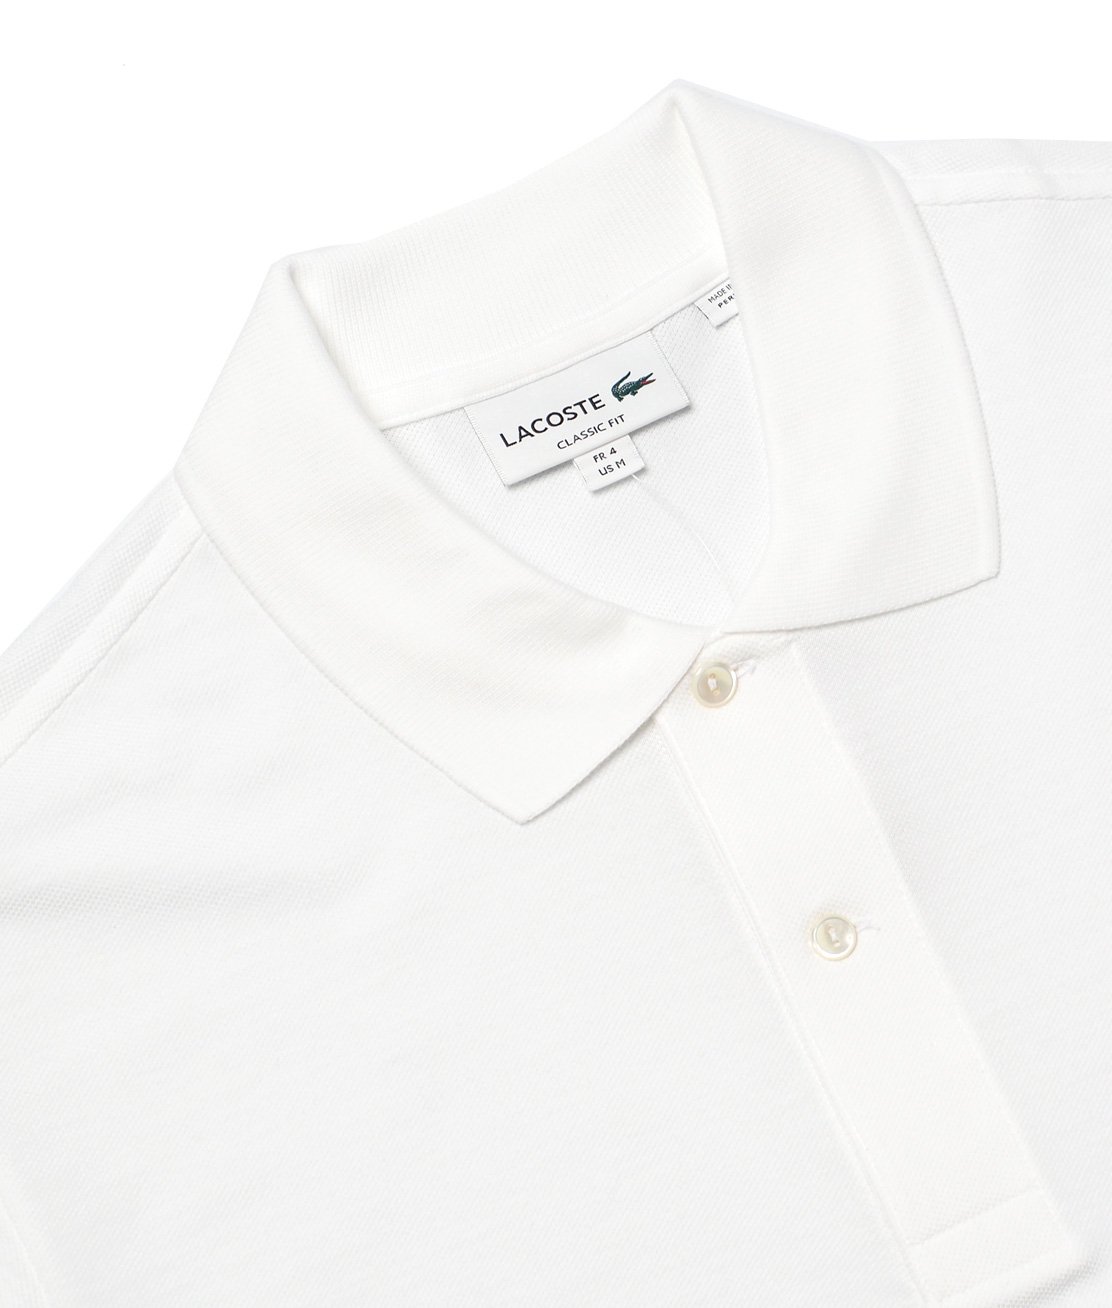 LACOSTE】L1212 S/S CLASSIC PIQUET POLO - WHITE ポロシャツ ラコステ 